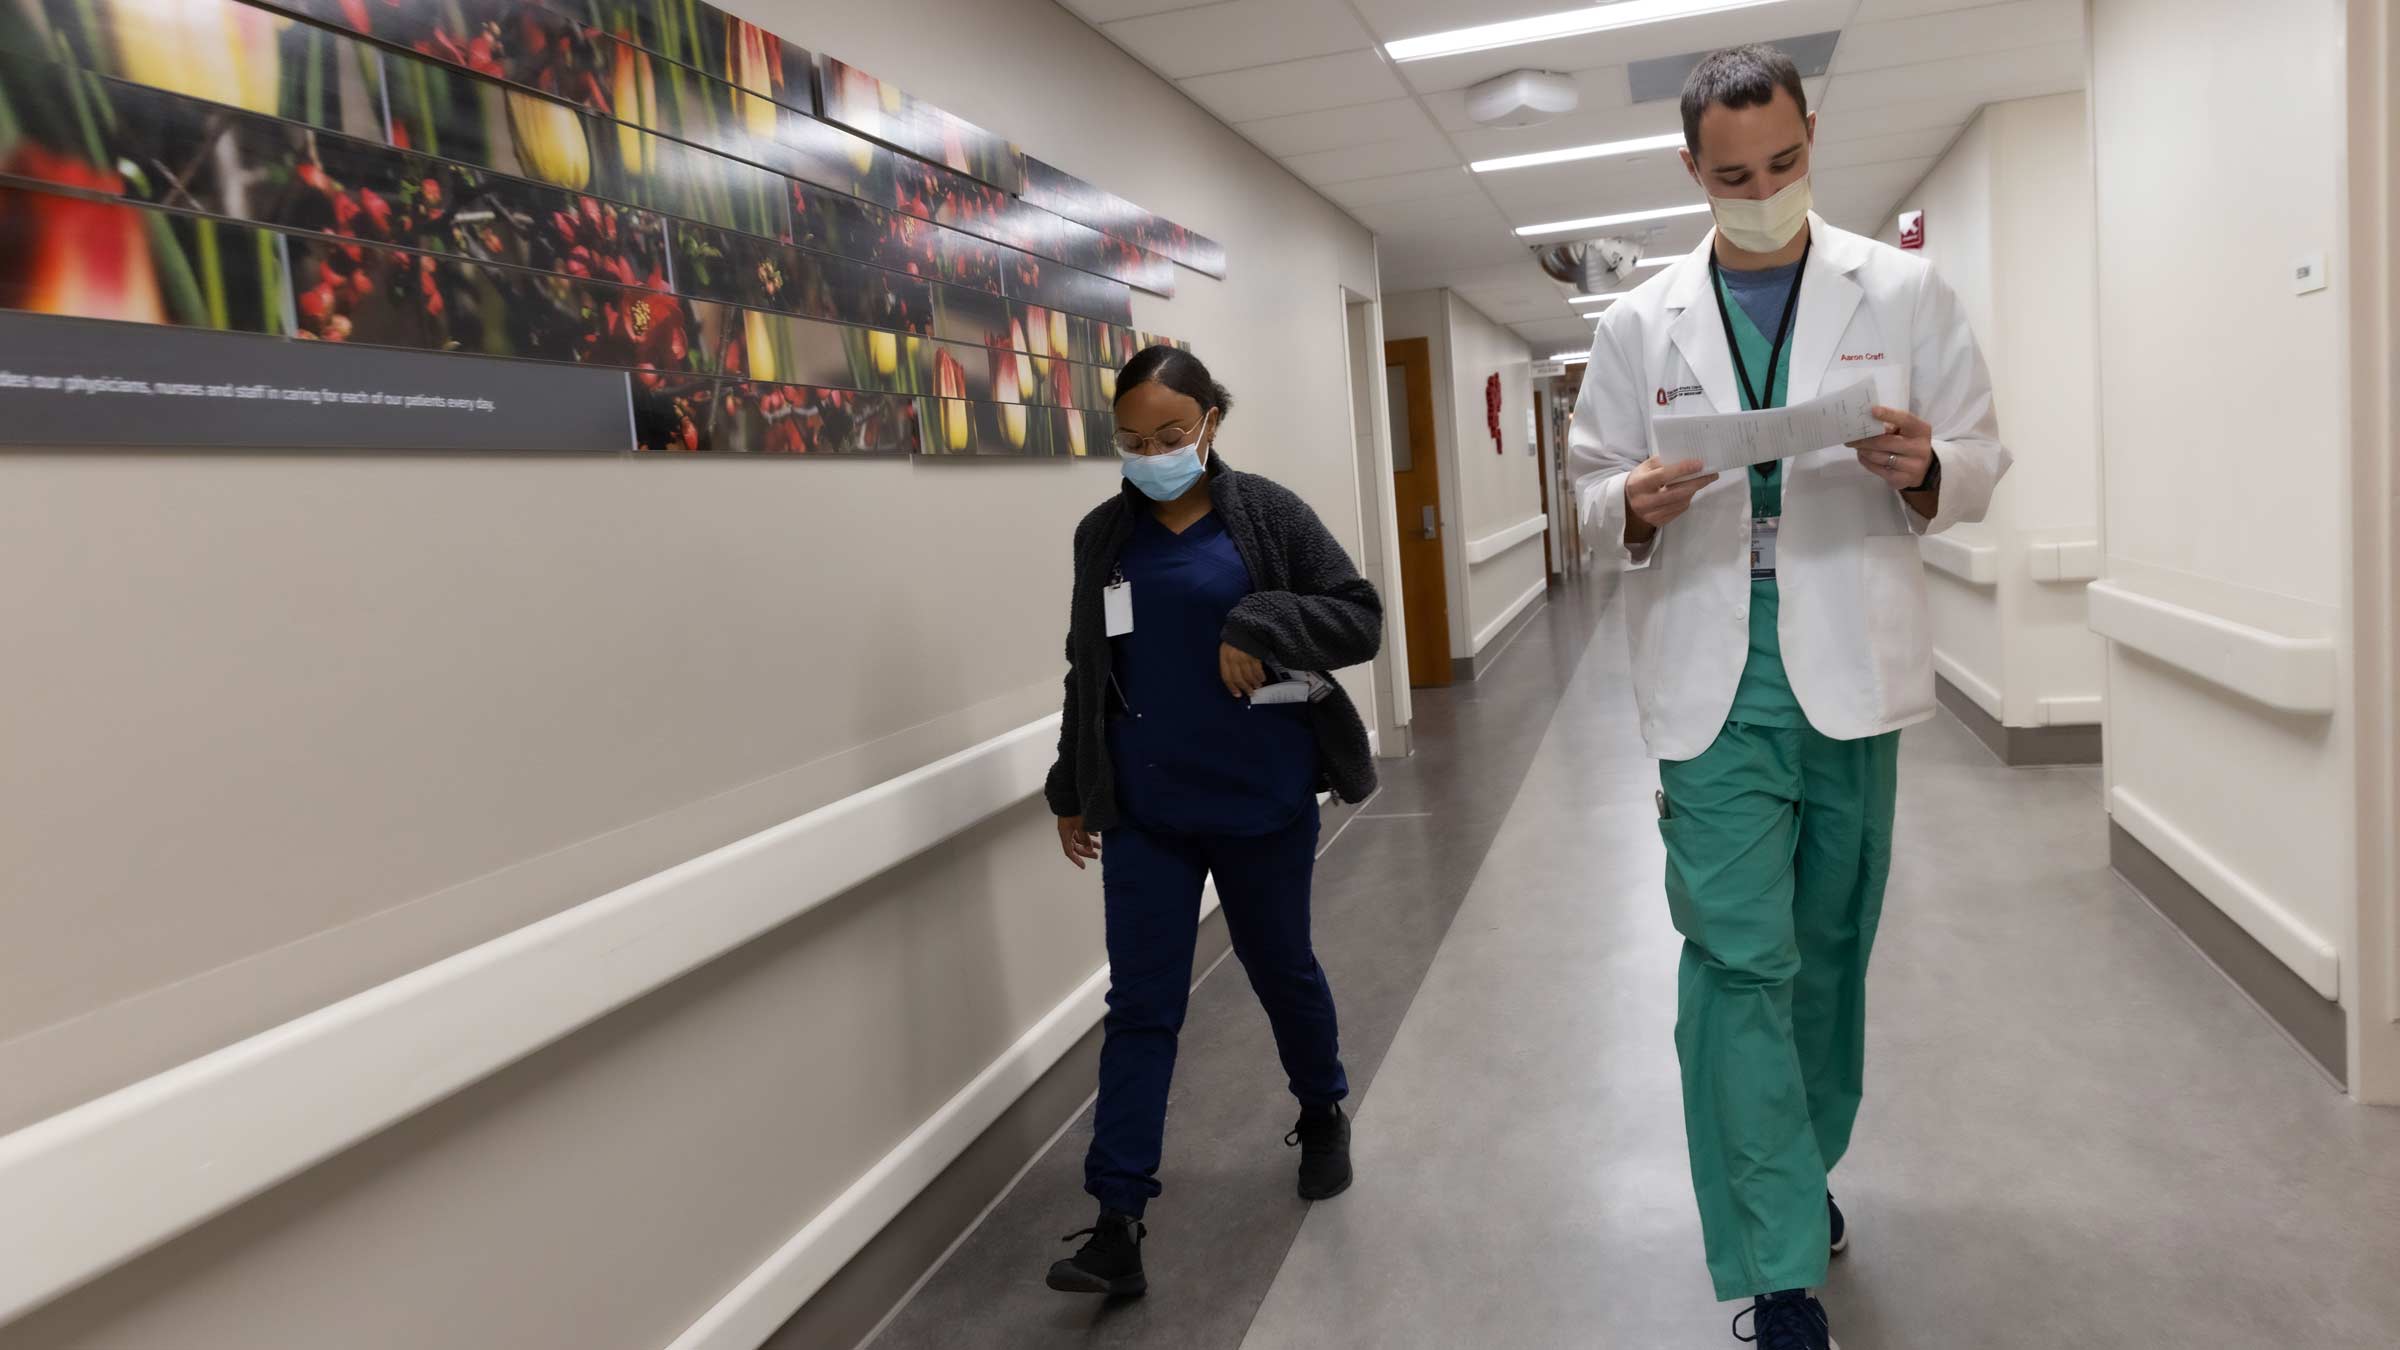 Ohio State medical student Aaron Craft doing clinical rotations in the hospital